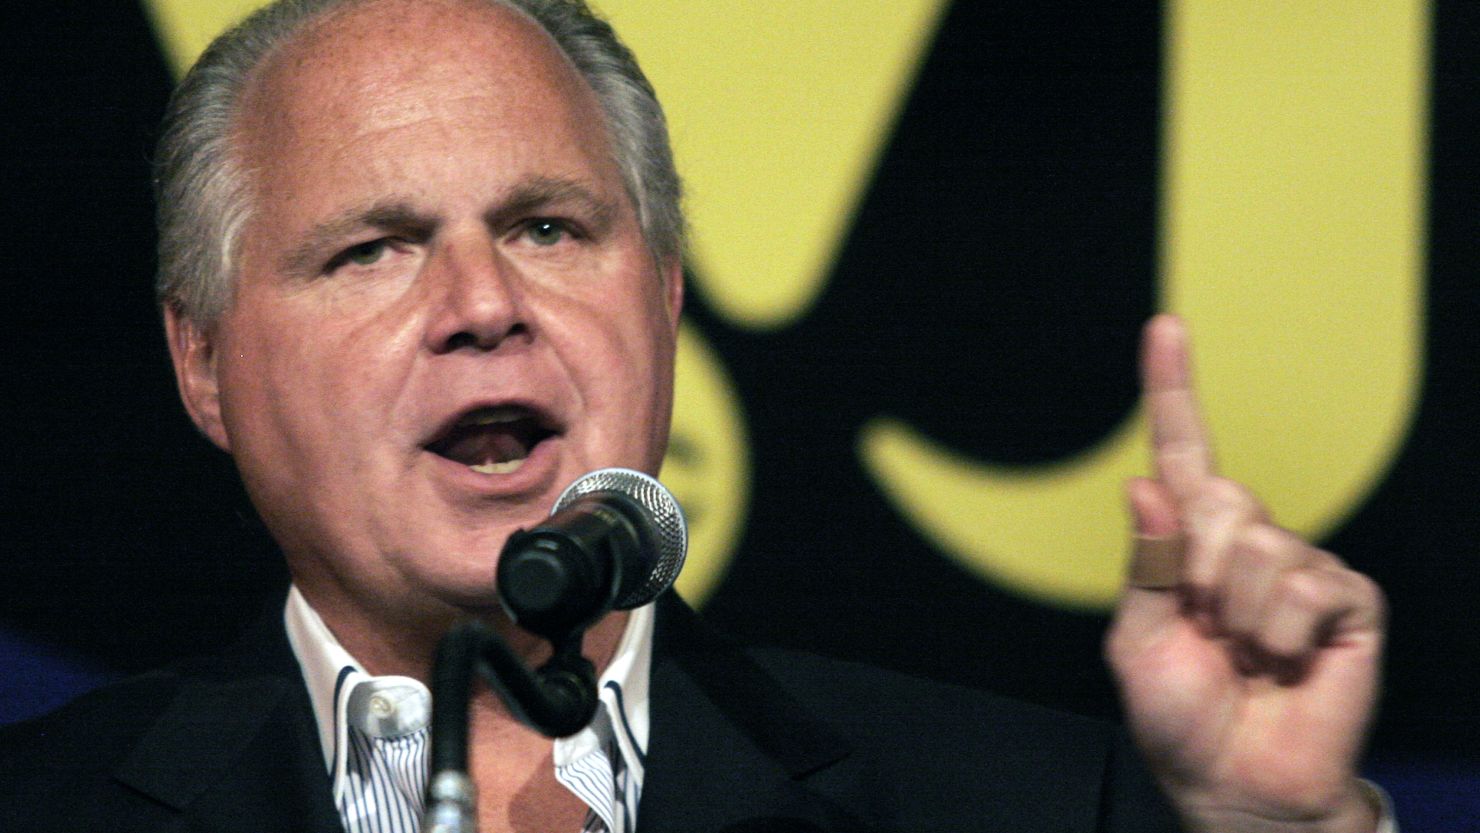 Rush Limbaugh, conservative and influential radio talk show host, makes a point.